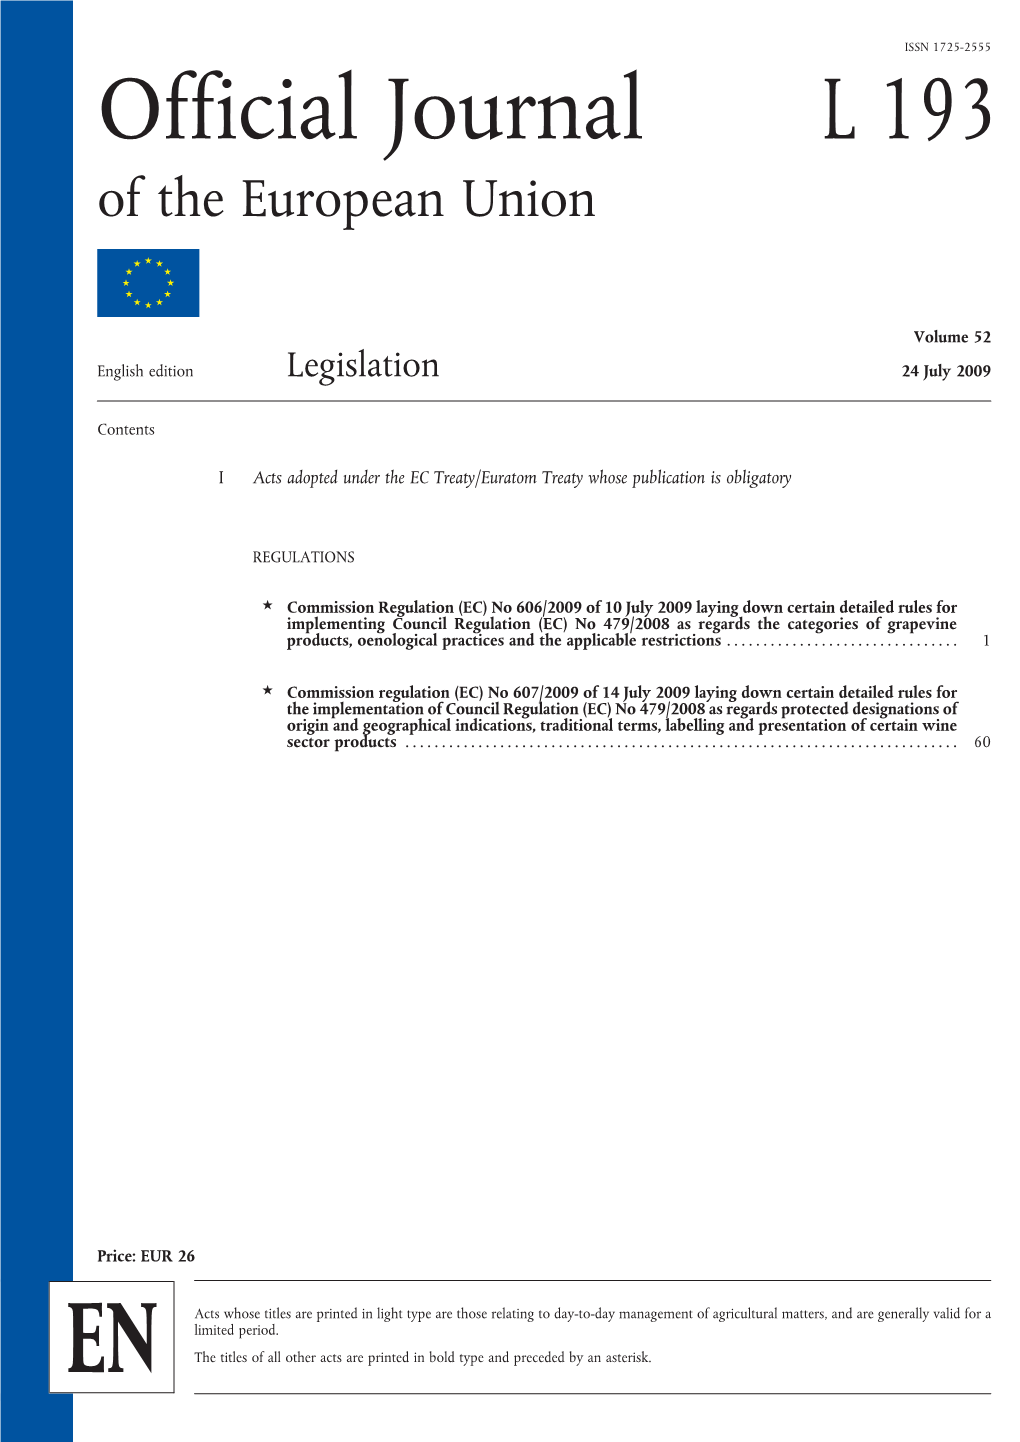 Official Journal L 193 of the European Union